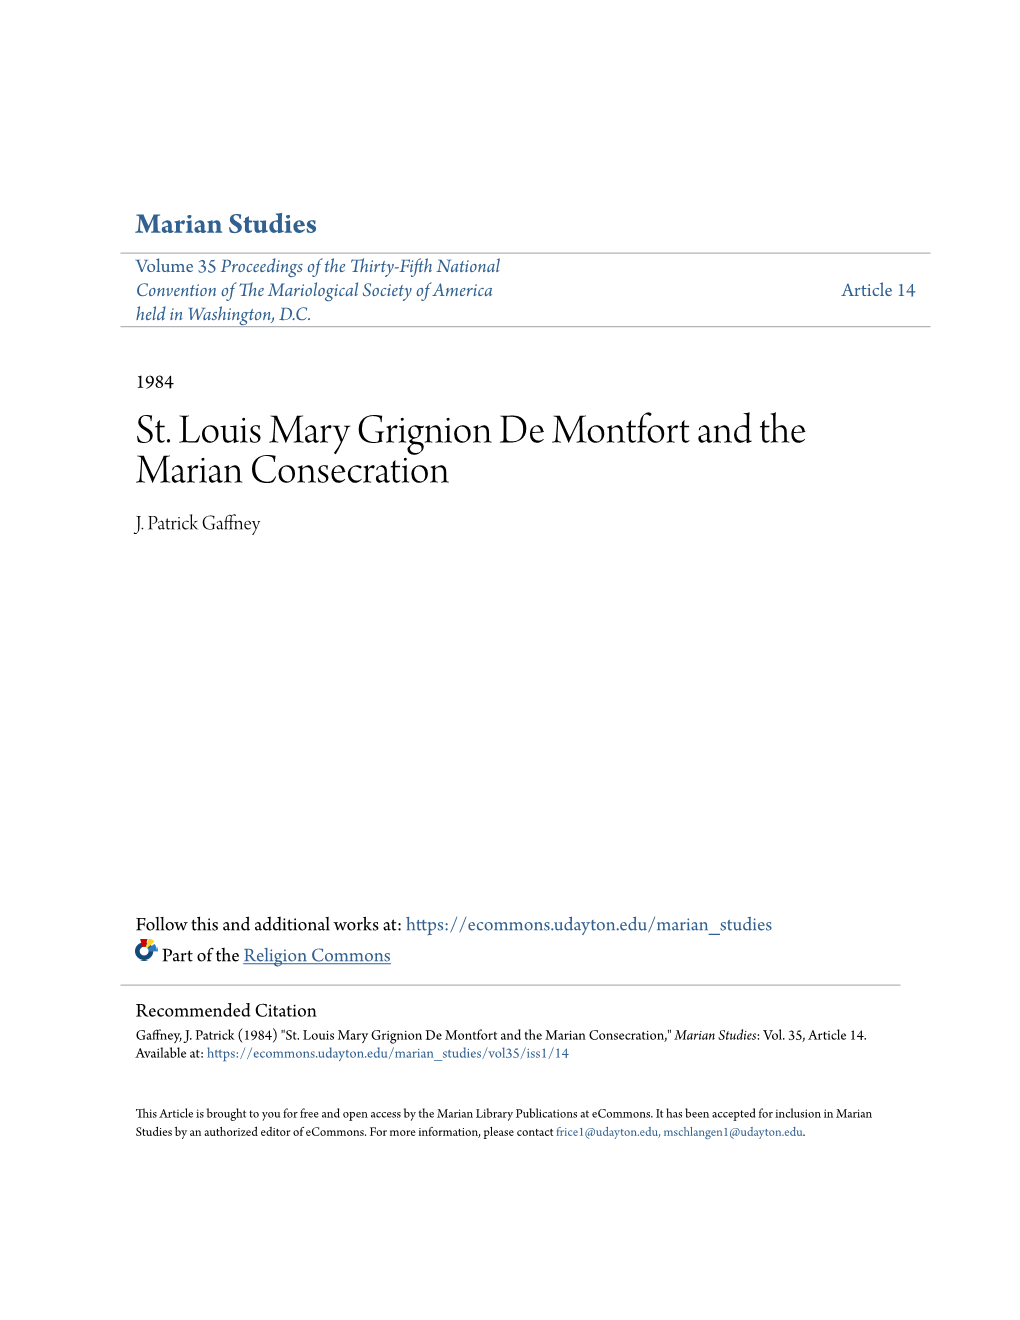 St. Louis Mary Grignion De Montfort and the Marian Consecration J